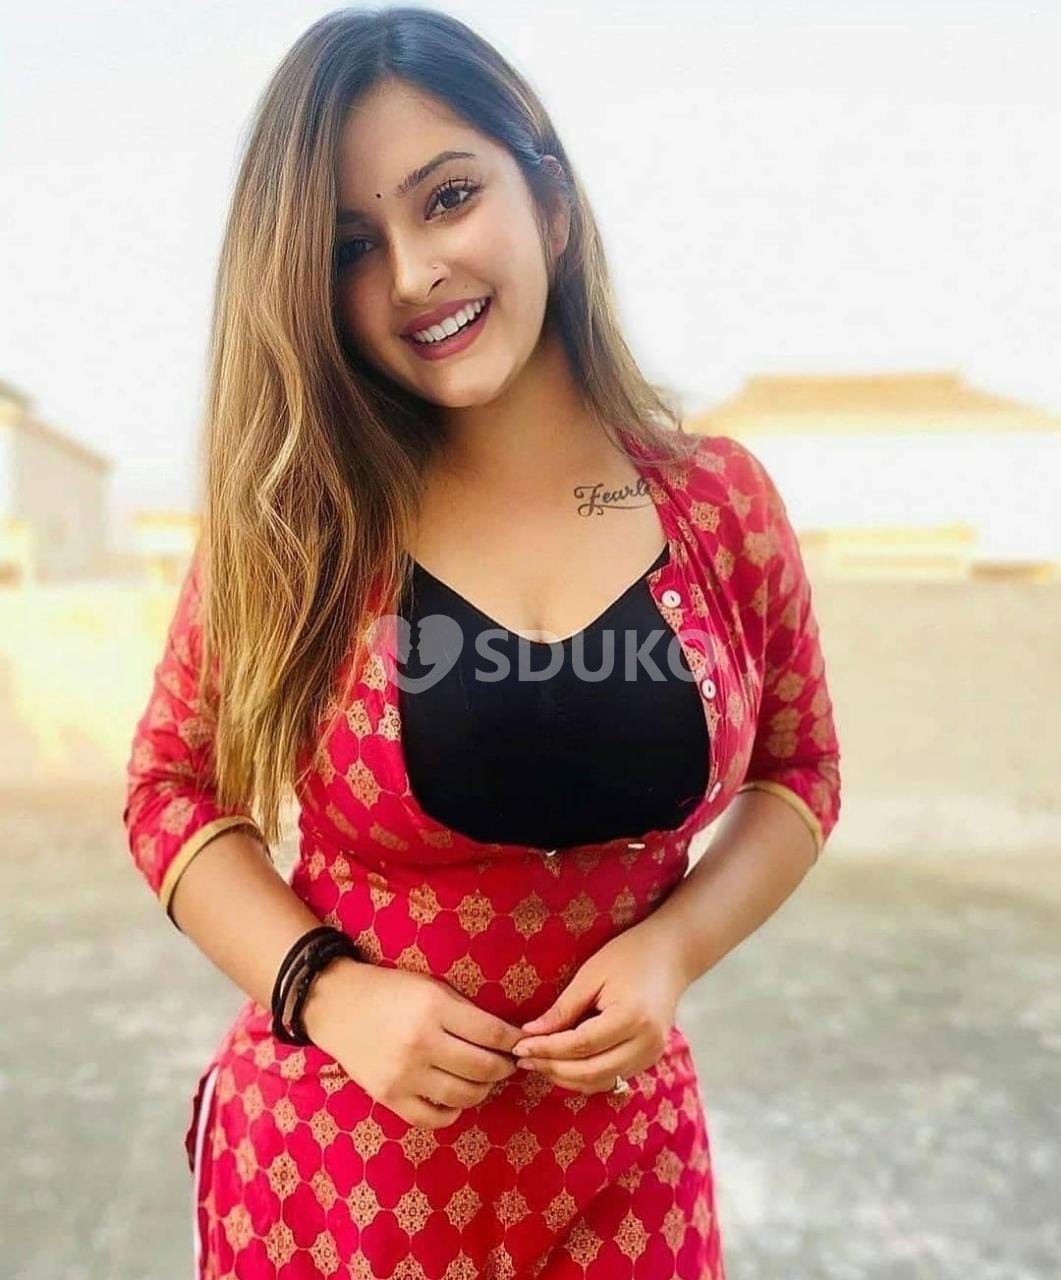 ANAND CALL ME DIVYA LOW PRICE UNLIMITED SHOOT 100% GENUINE SEXY VIP CALL GIRLS ARE PROVIDED SECURE SERVICES CALL 24 HOUR